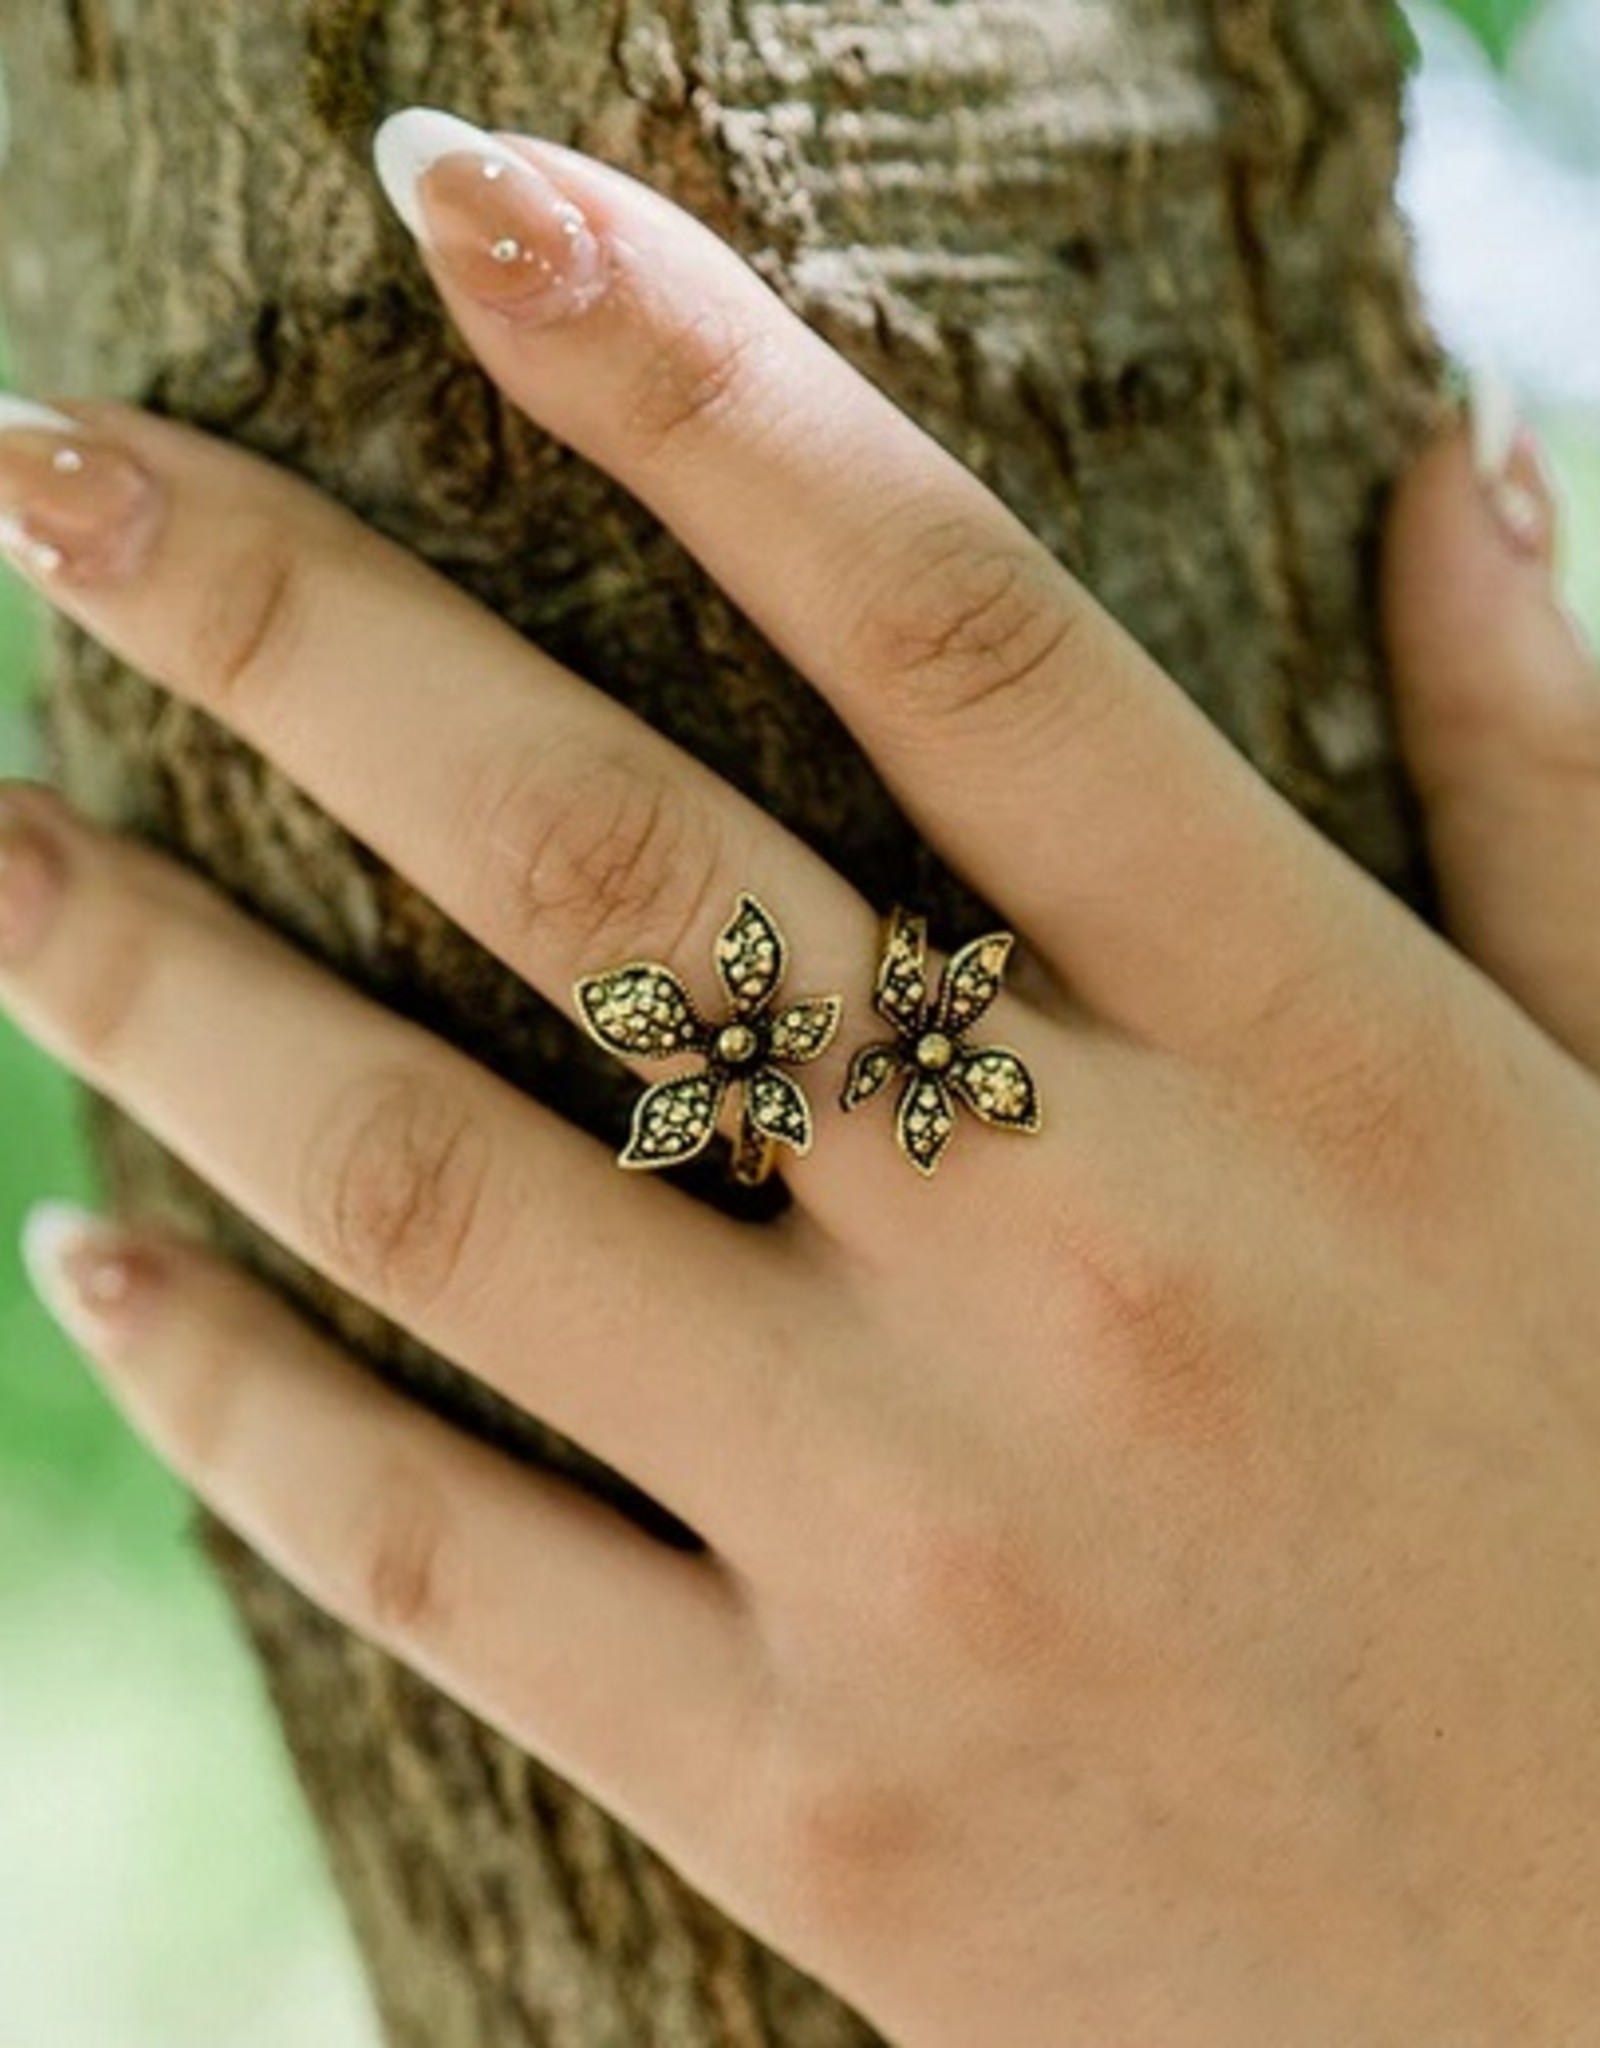 Ornamental Things Gold Lily Ring